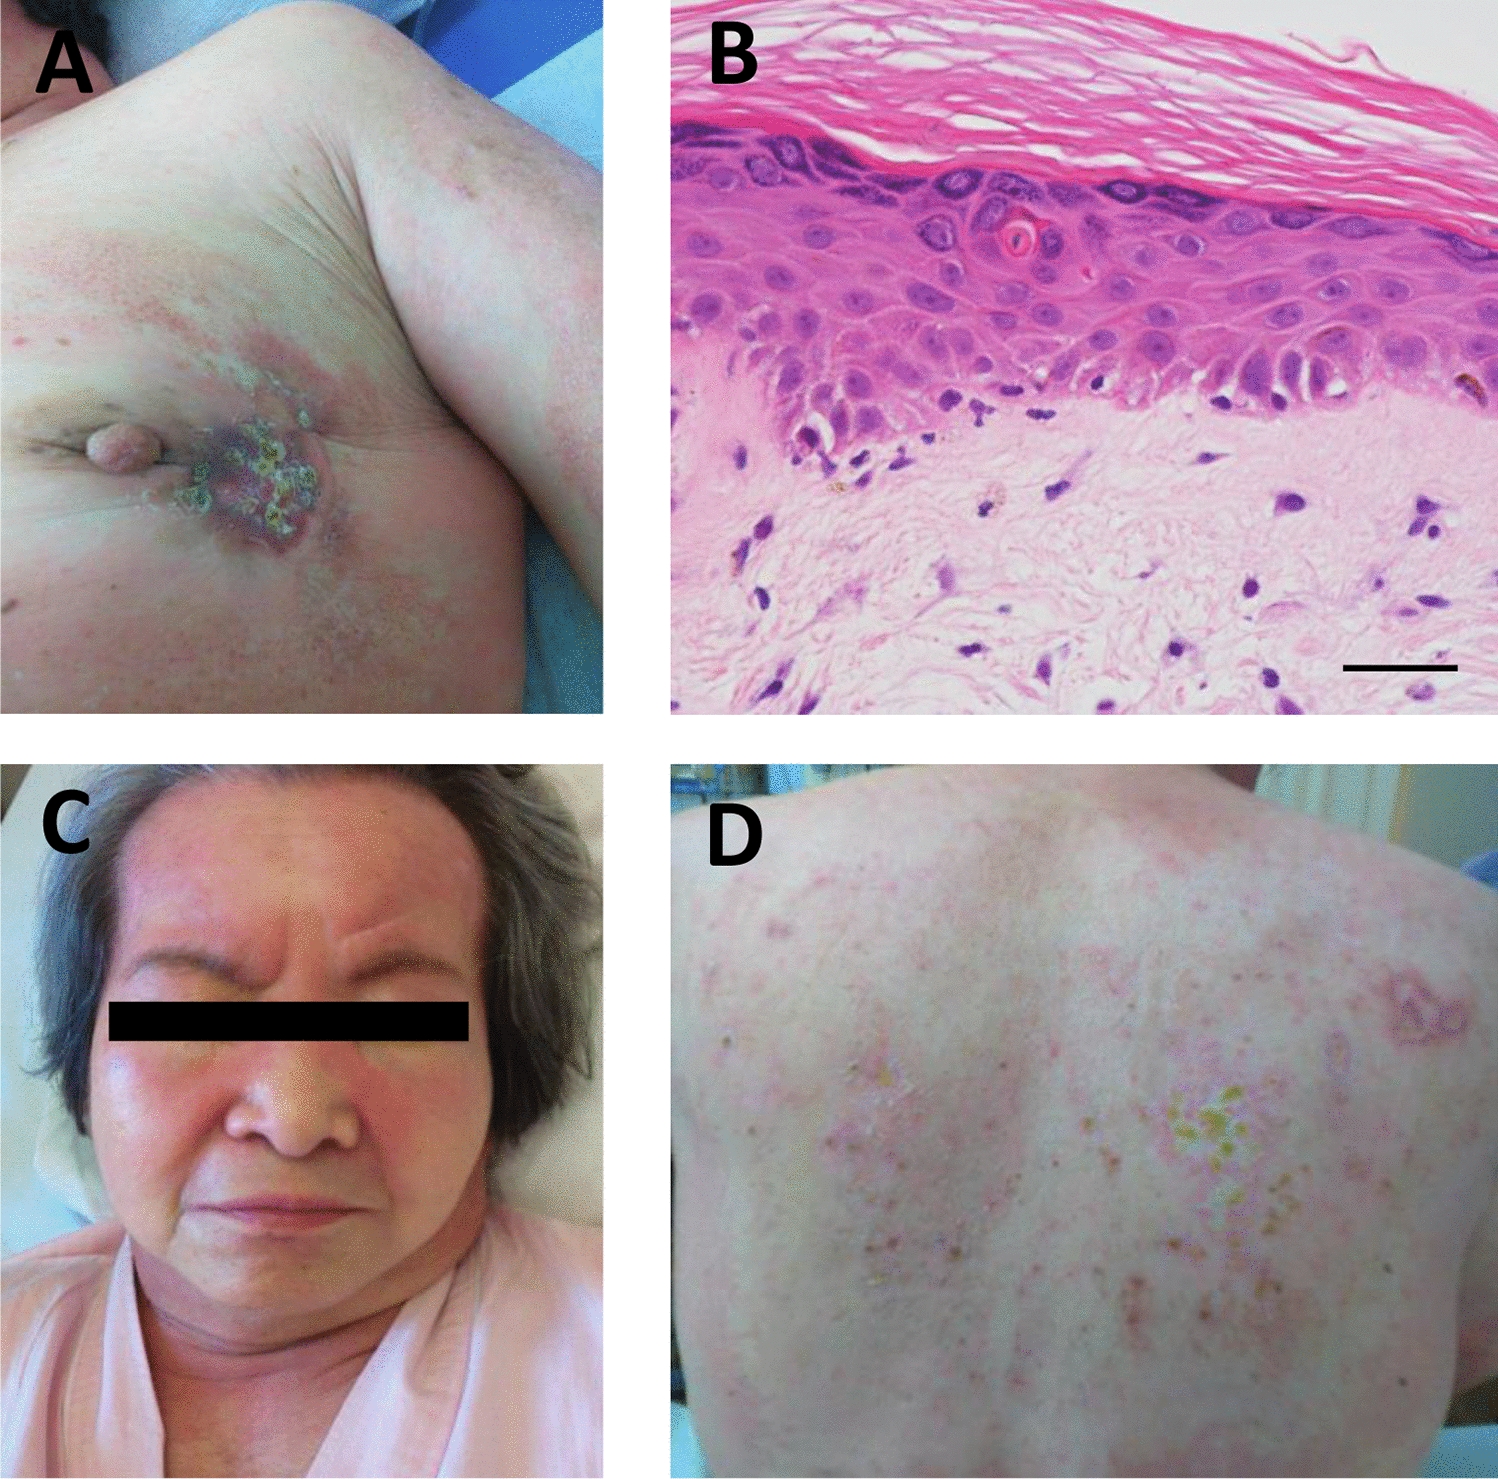 Remarkable remission of symptomatic dermatomyositis after curative breast cancer surgery